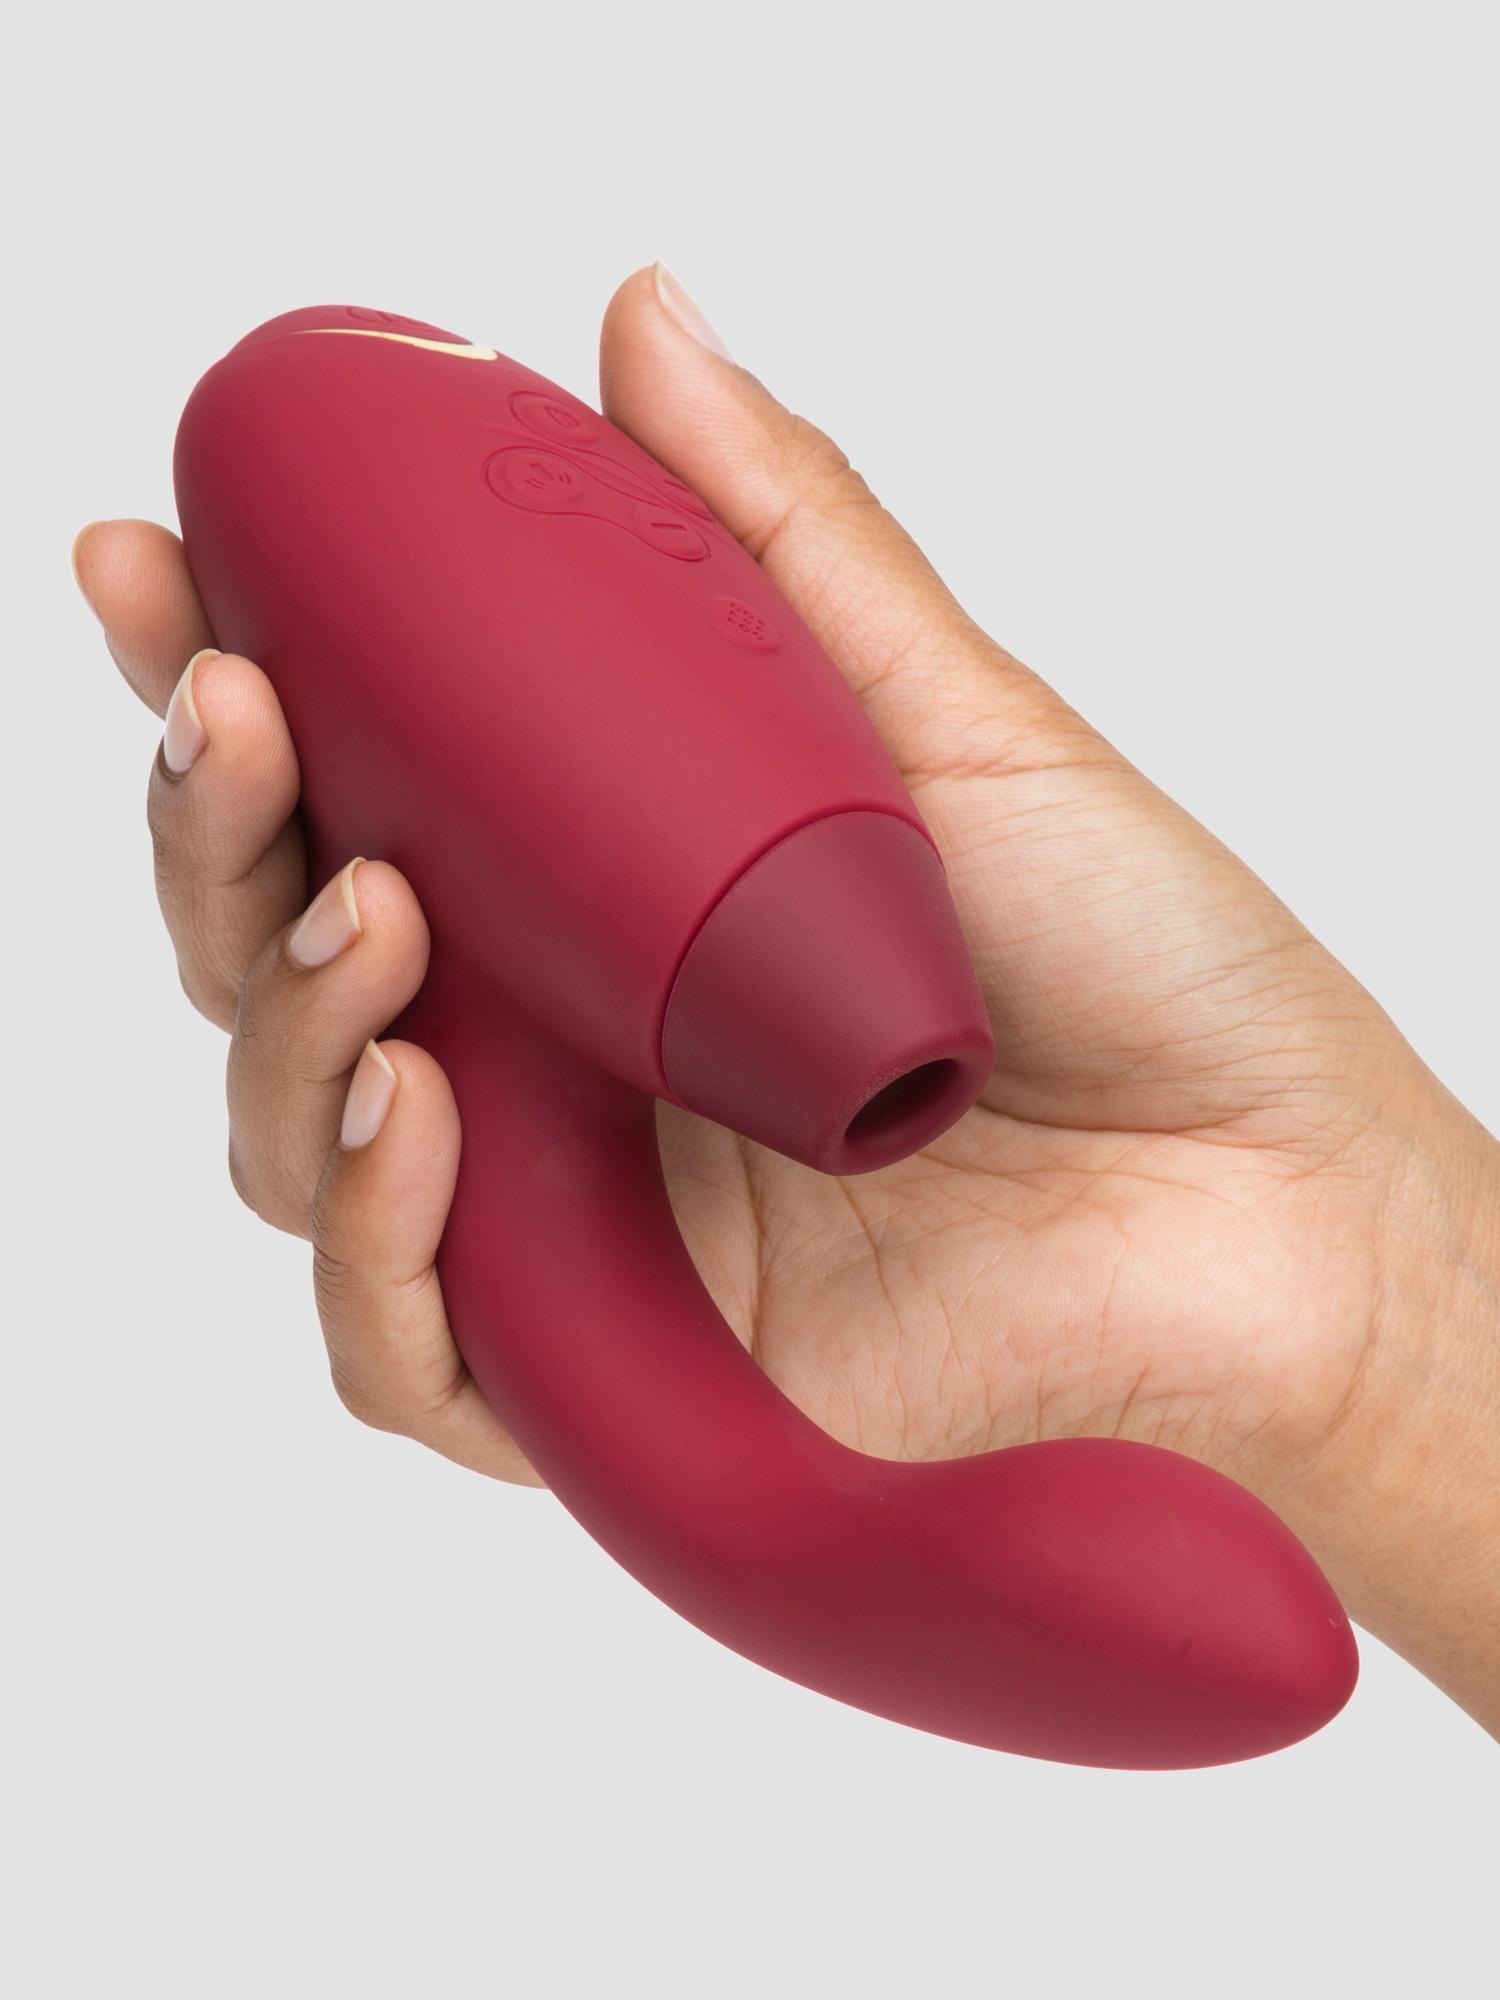 14 Sex Toys Designed For Some Intense Clitoral Stimulation HuffPost Life image